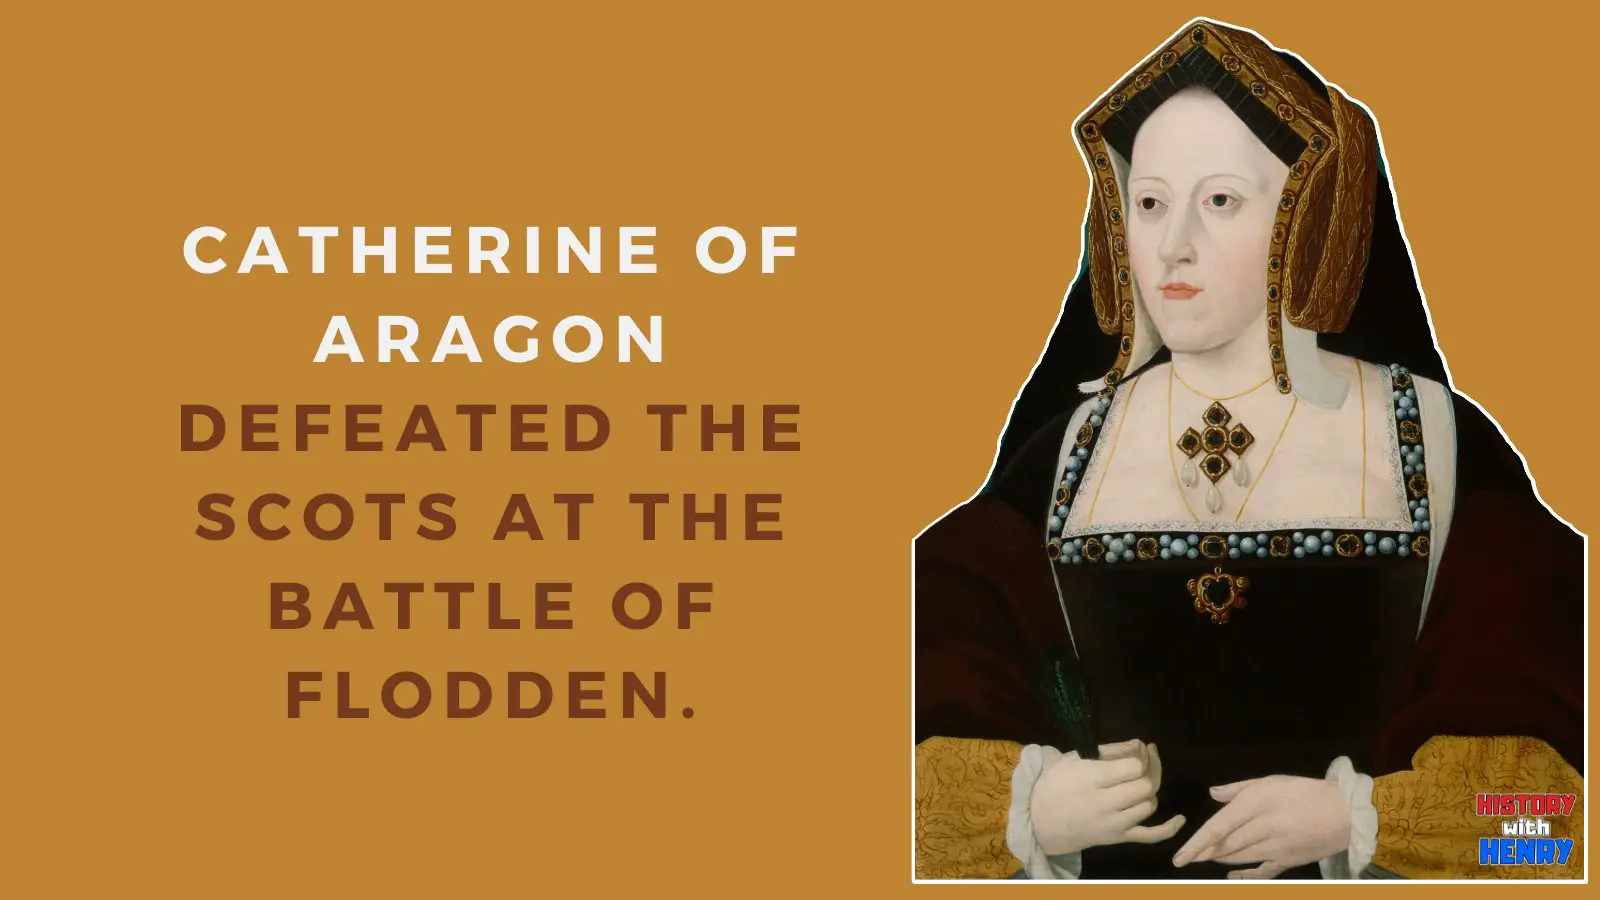 12 Facts about Catherine of Aragon